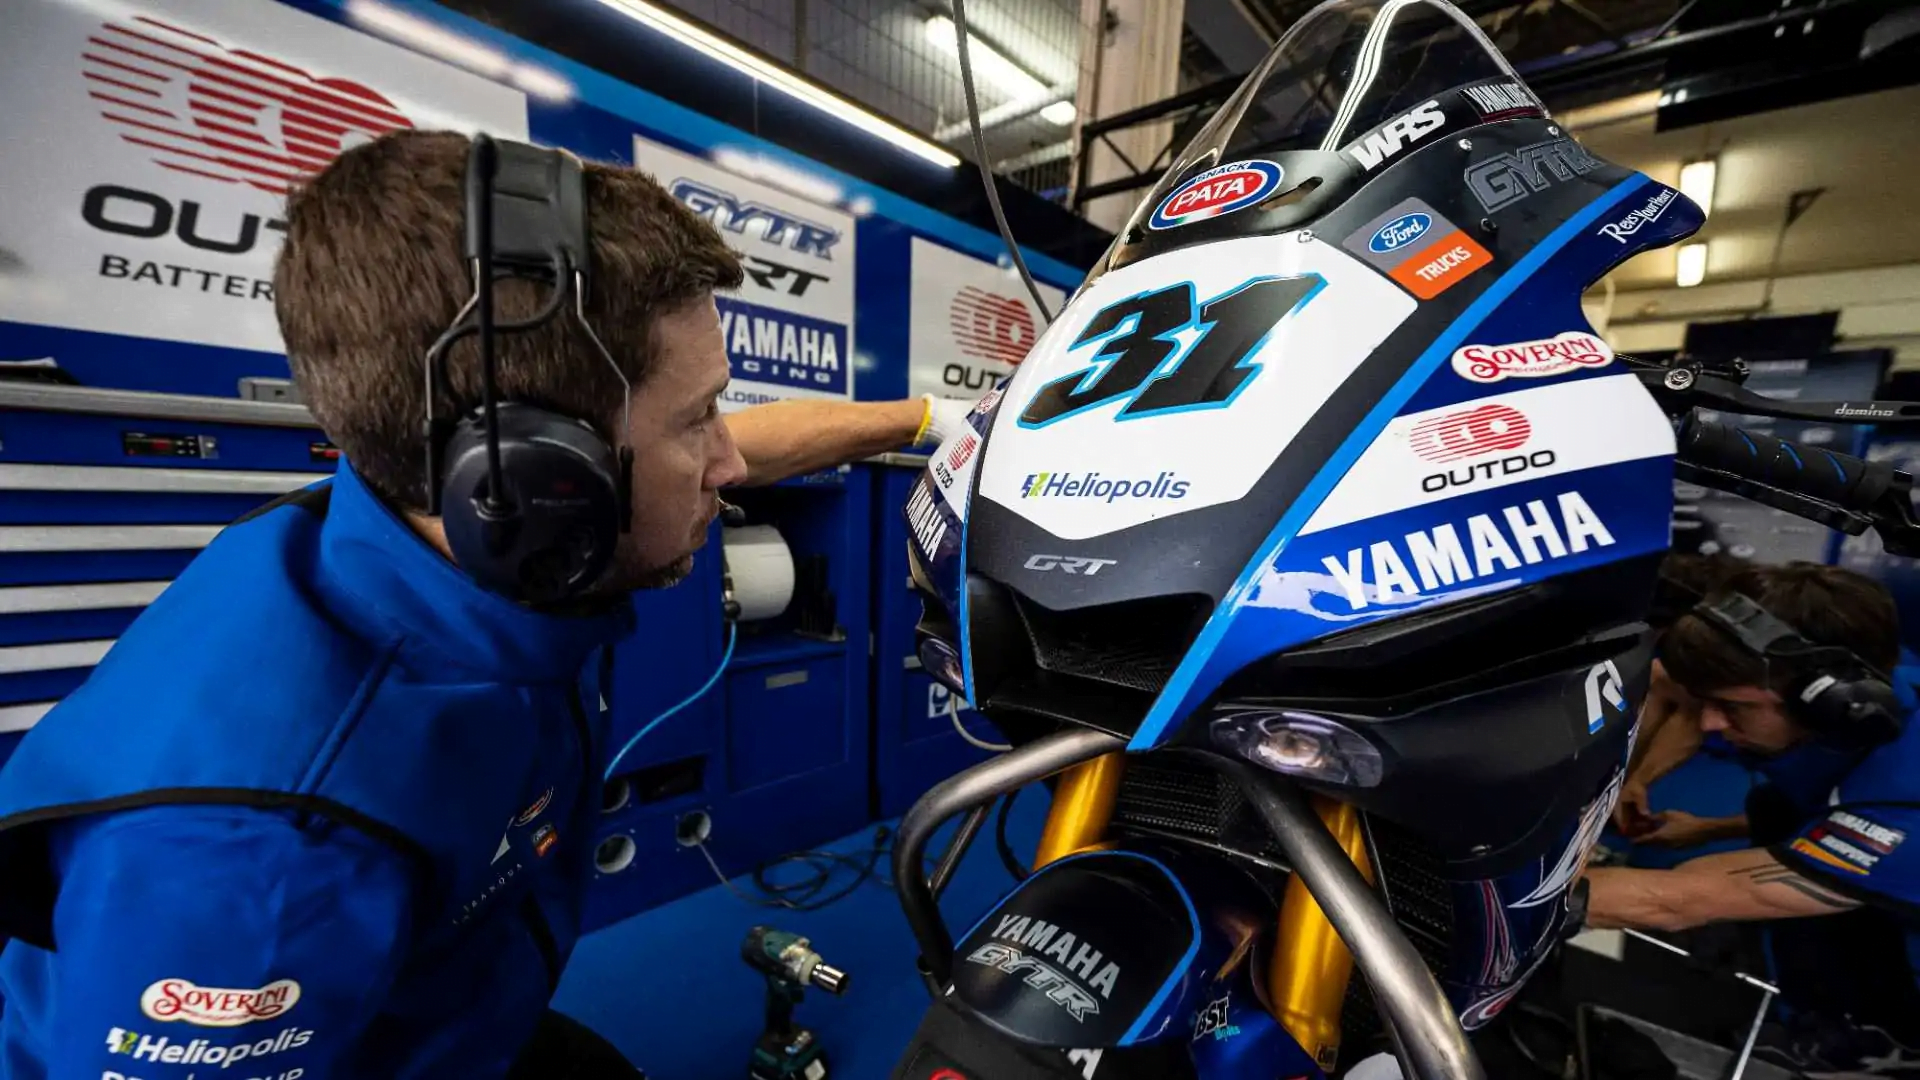 Yamaha Technical School: training for the next Yamaha competition technicians is created